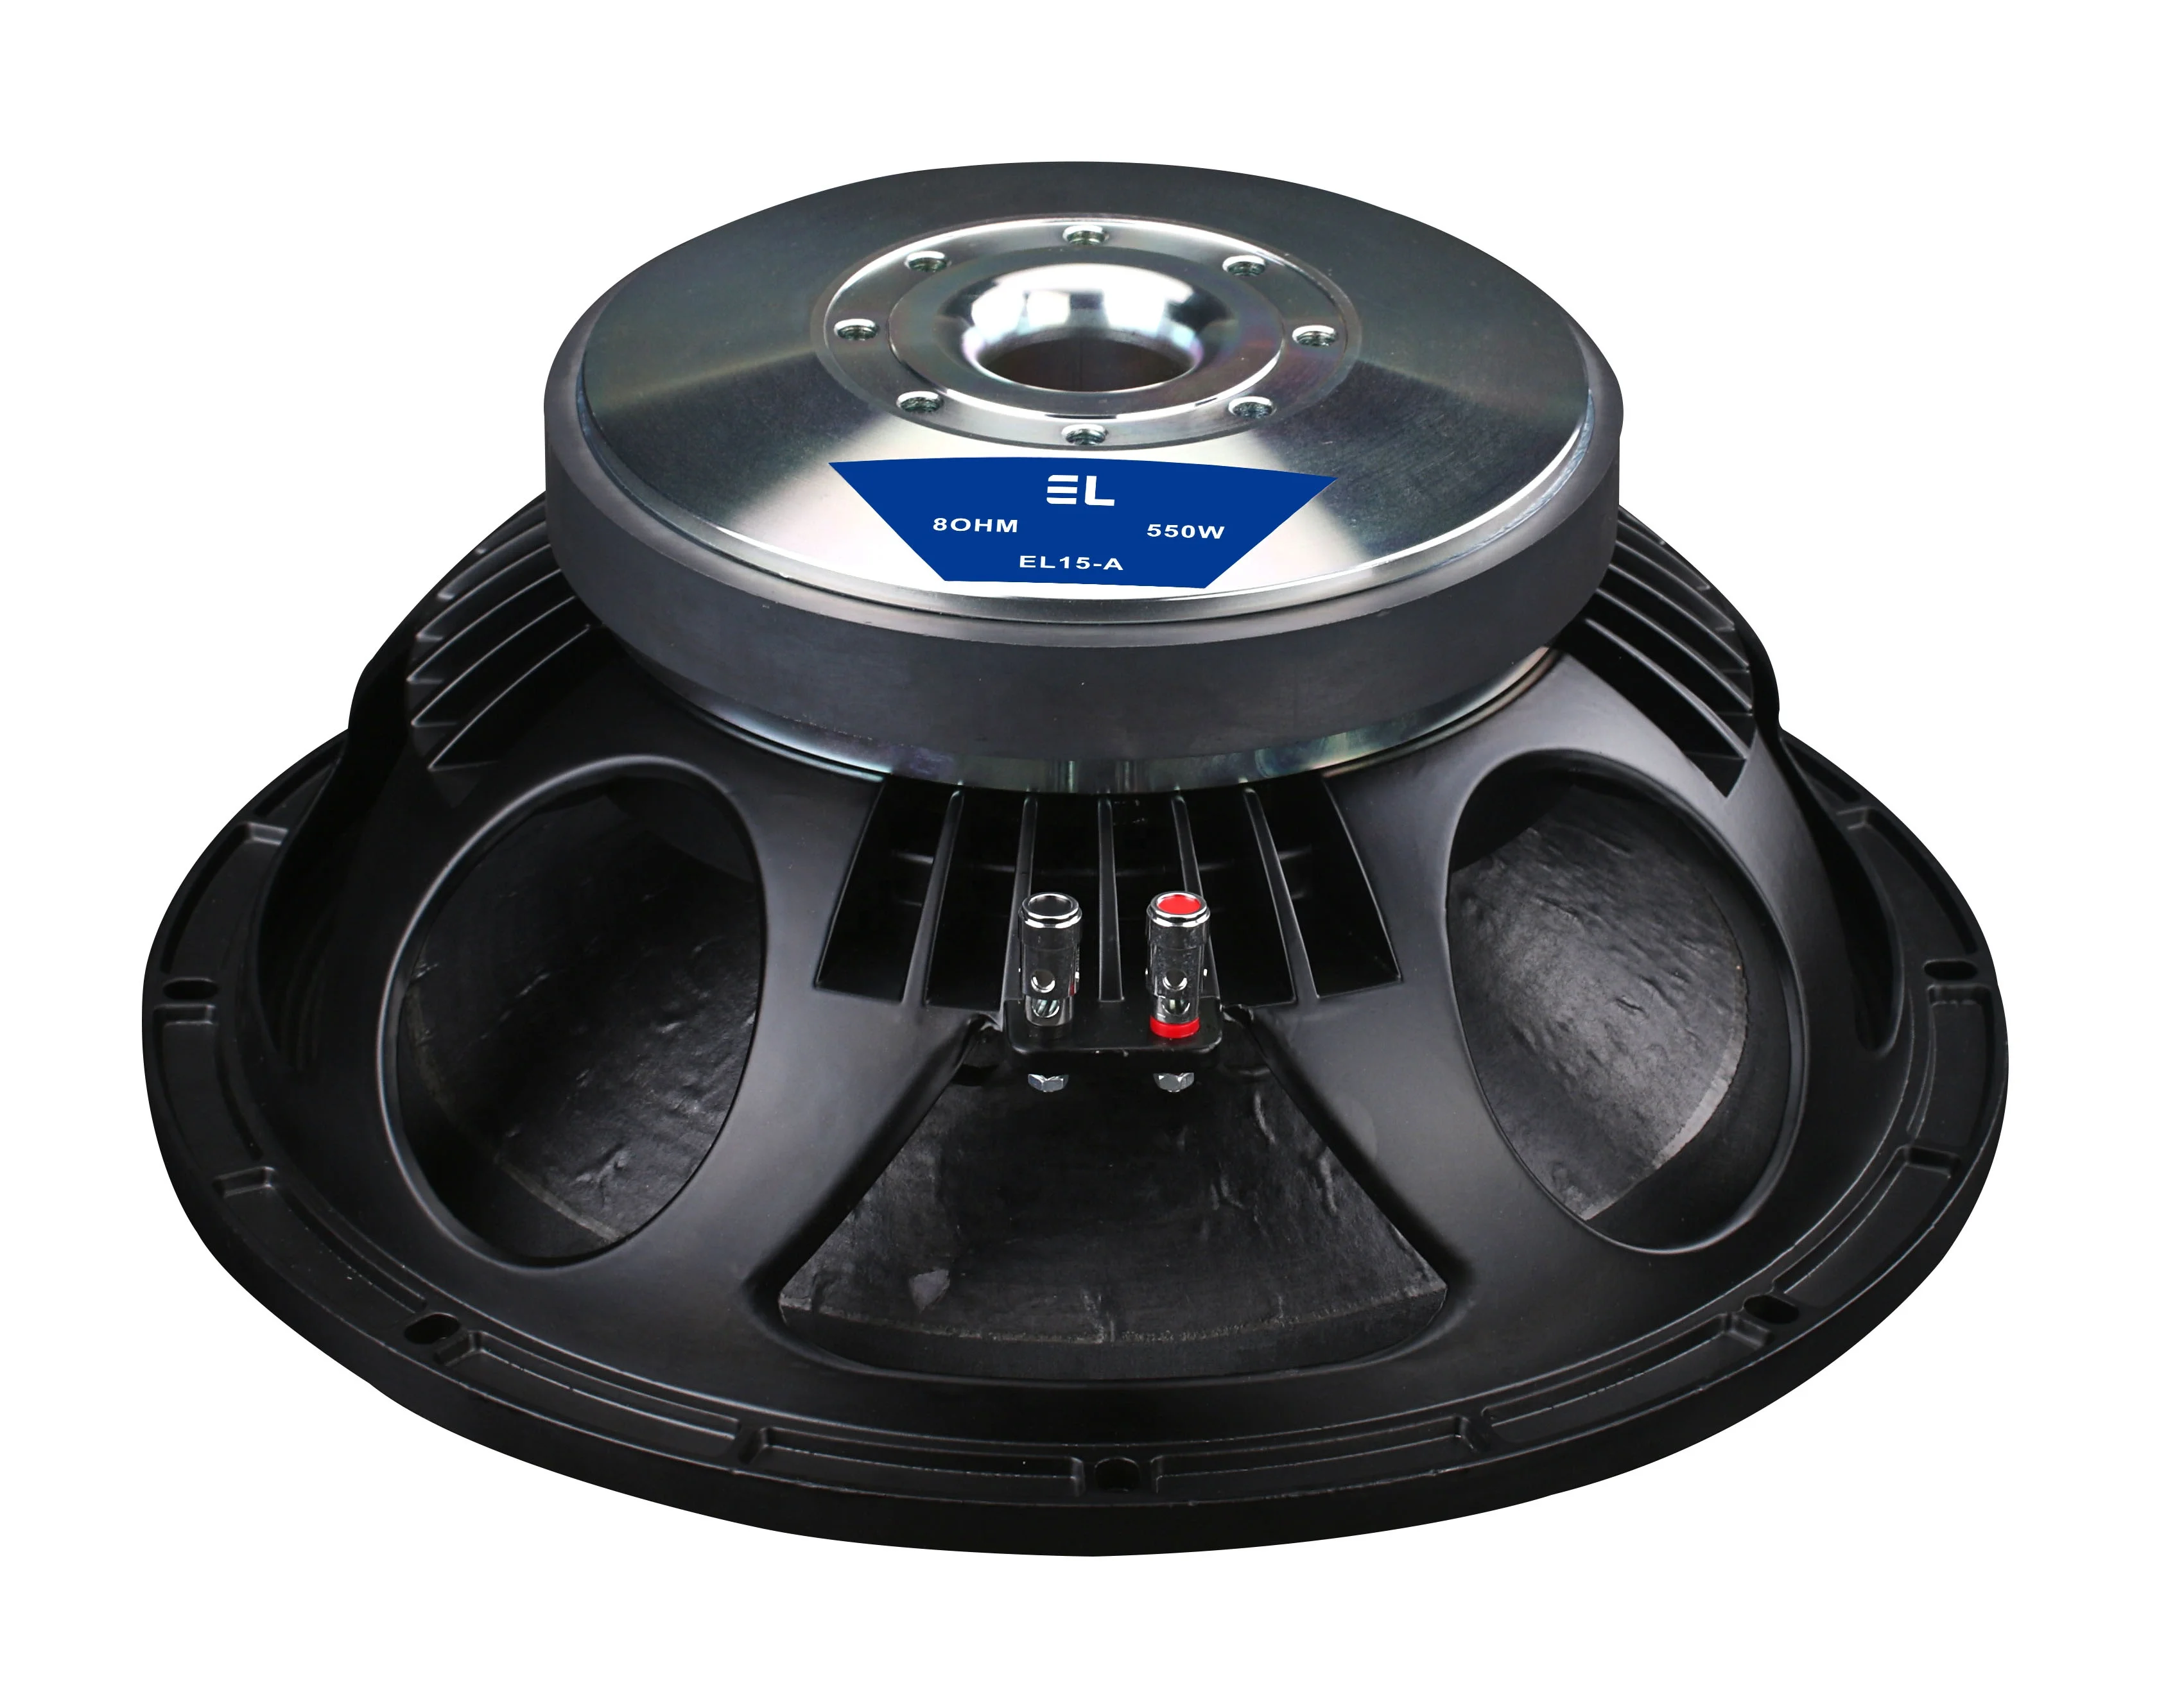 El15-a Professional Audio System Outdoor Subwoofer Speaker 15 Top Pro Speaker 15 Inch Bass Powerful - Buy Outdoor Subwoofer Speaker 15 Inch Top Pro Audio Speaker,15 Bass Powerful